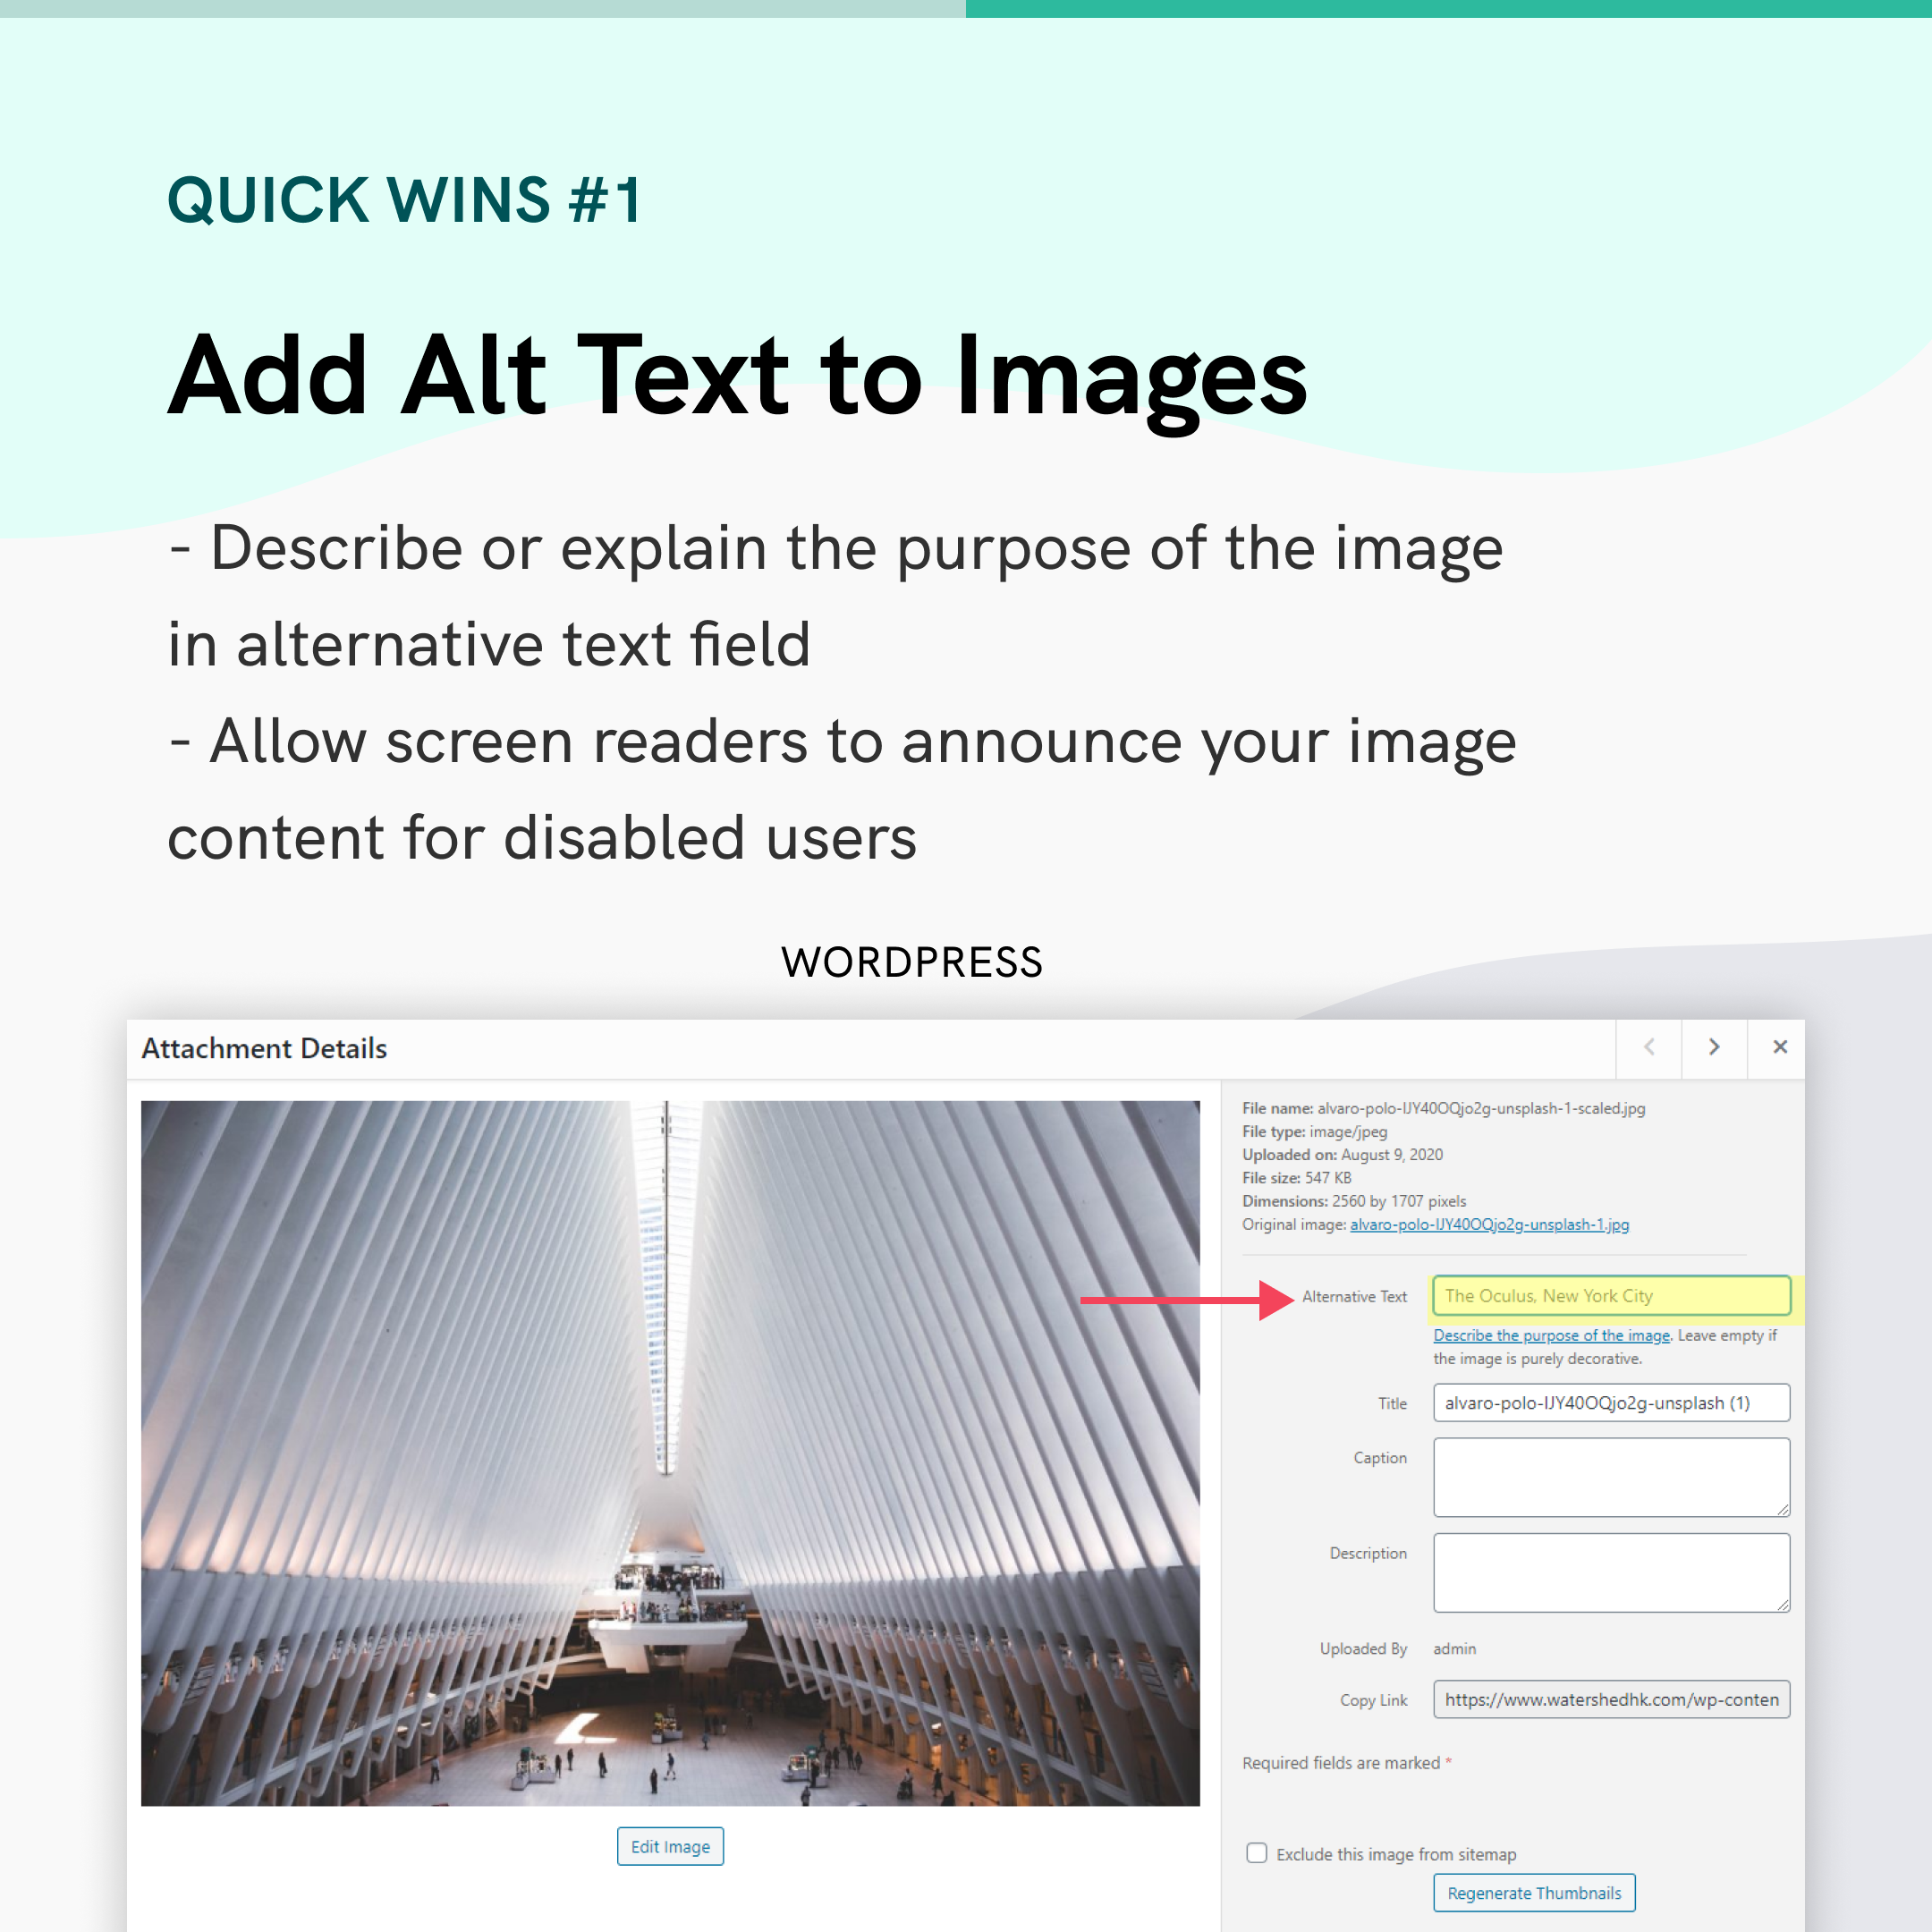 Add Alt Text to Images. Describe or explain the purpose of the image in alternative text field, allow screen readers to announce your image content for disabled users